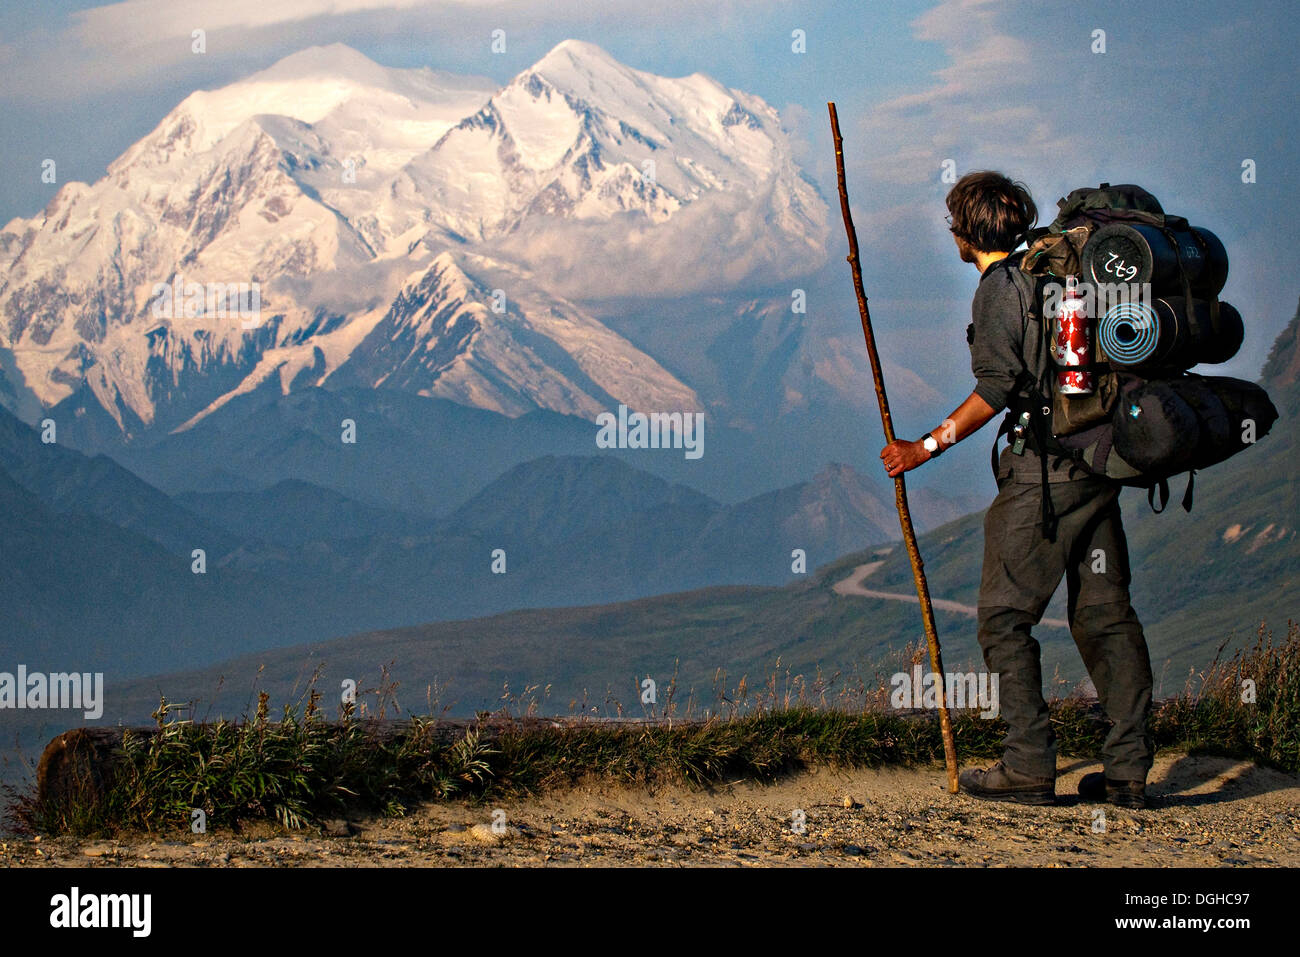 A hiker pauses to view Mt McKinley in Denali National Park, Alaska Stock Photo